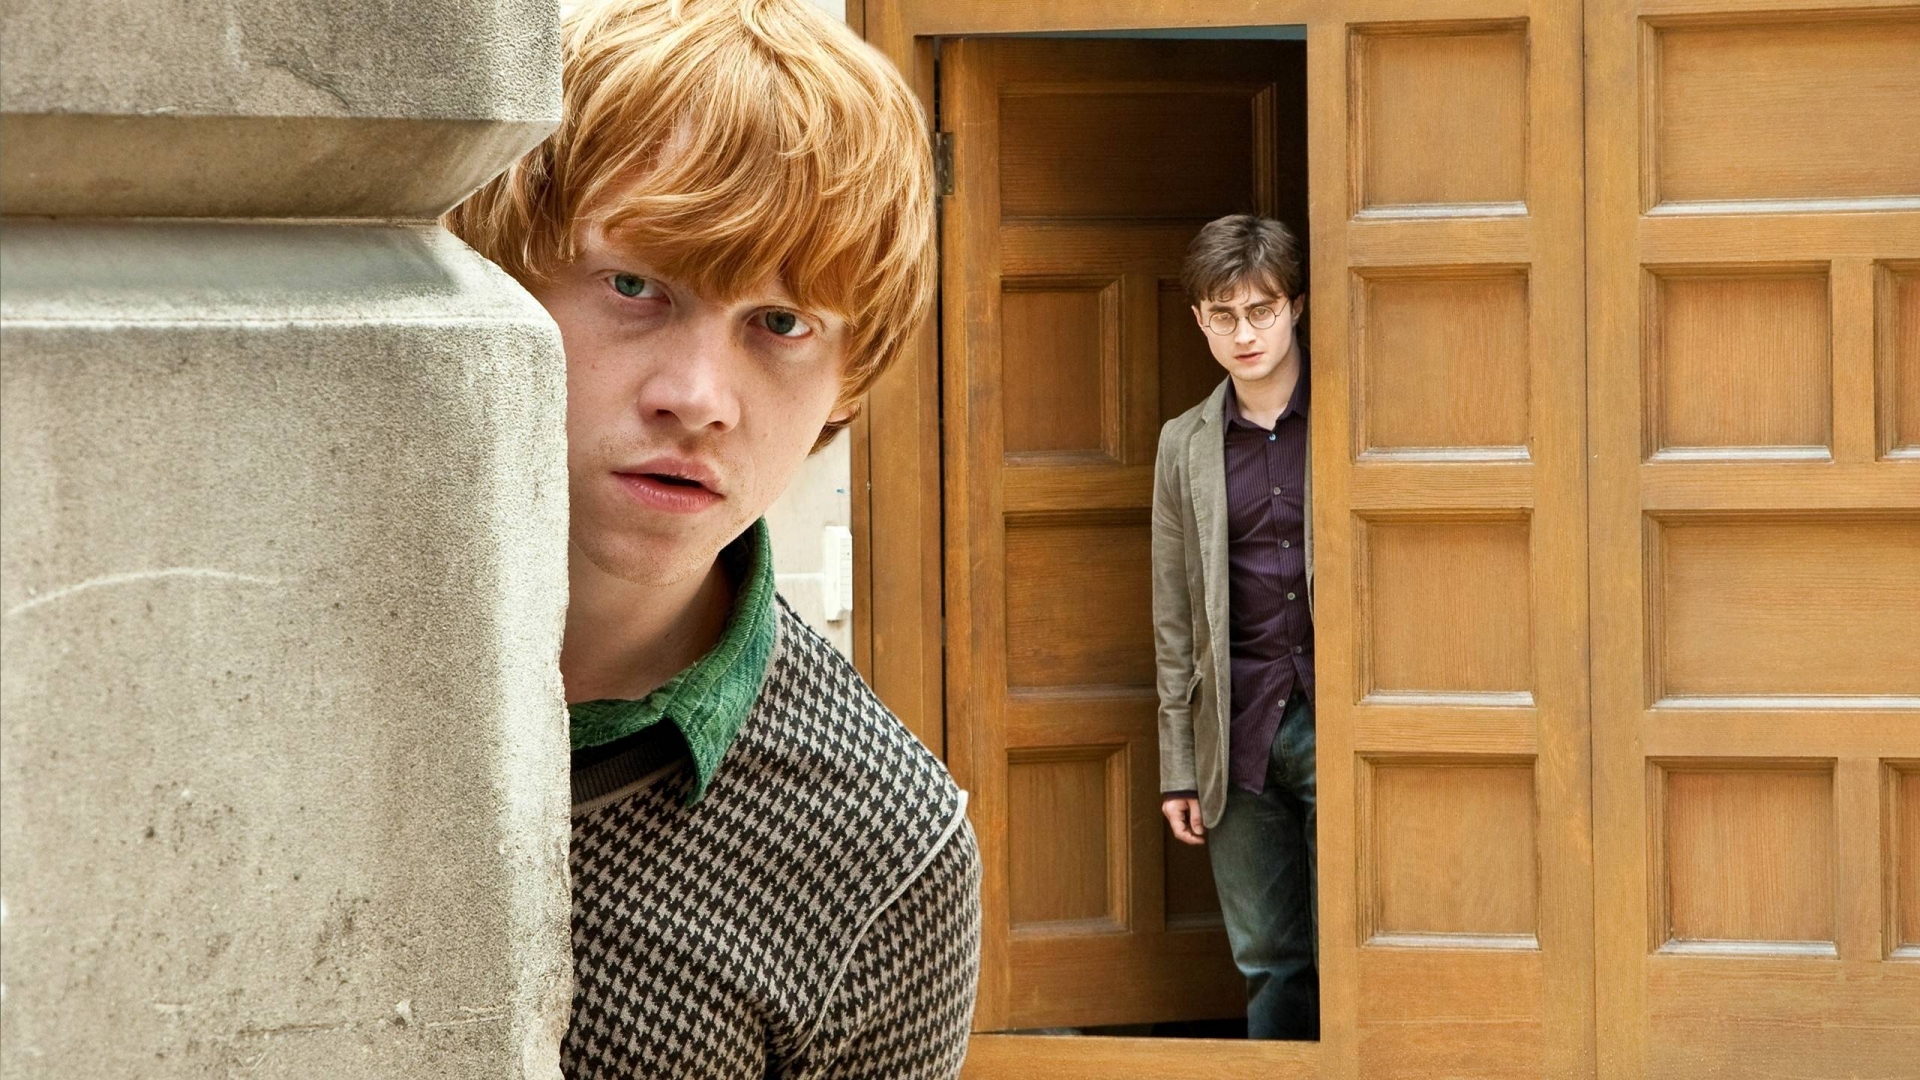 Daniel Radcliffe and Rupert Grint for 1920 x 1080 HDTV 1080p resolution